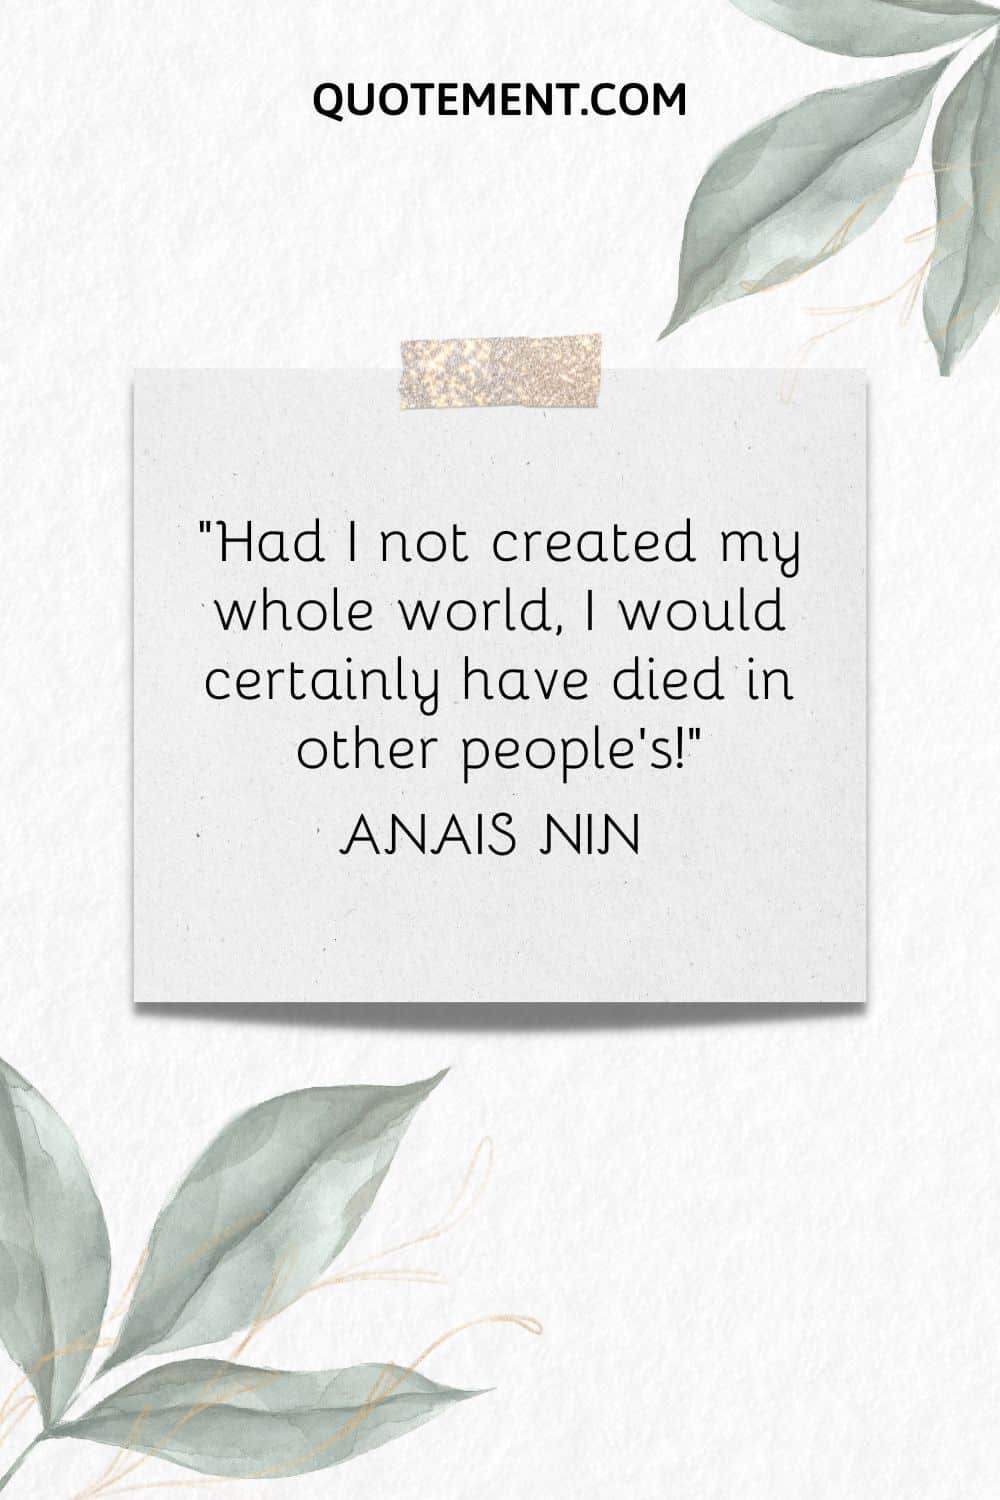 Had I not created my whole world, I would certainly have died in other people’s! — Anais Nin